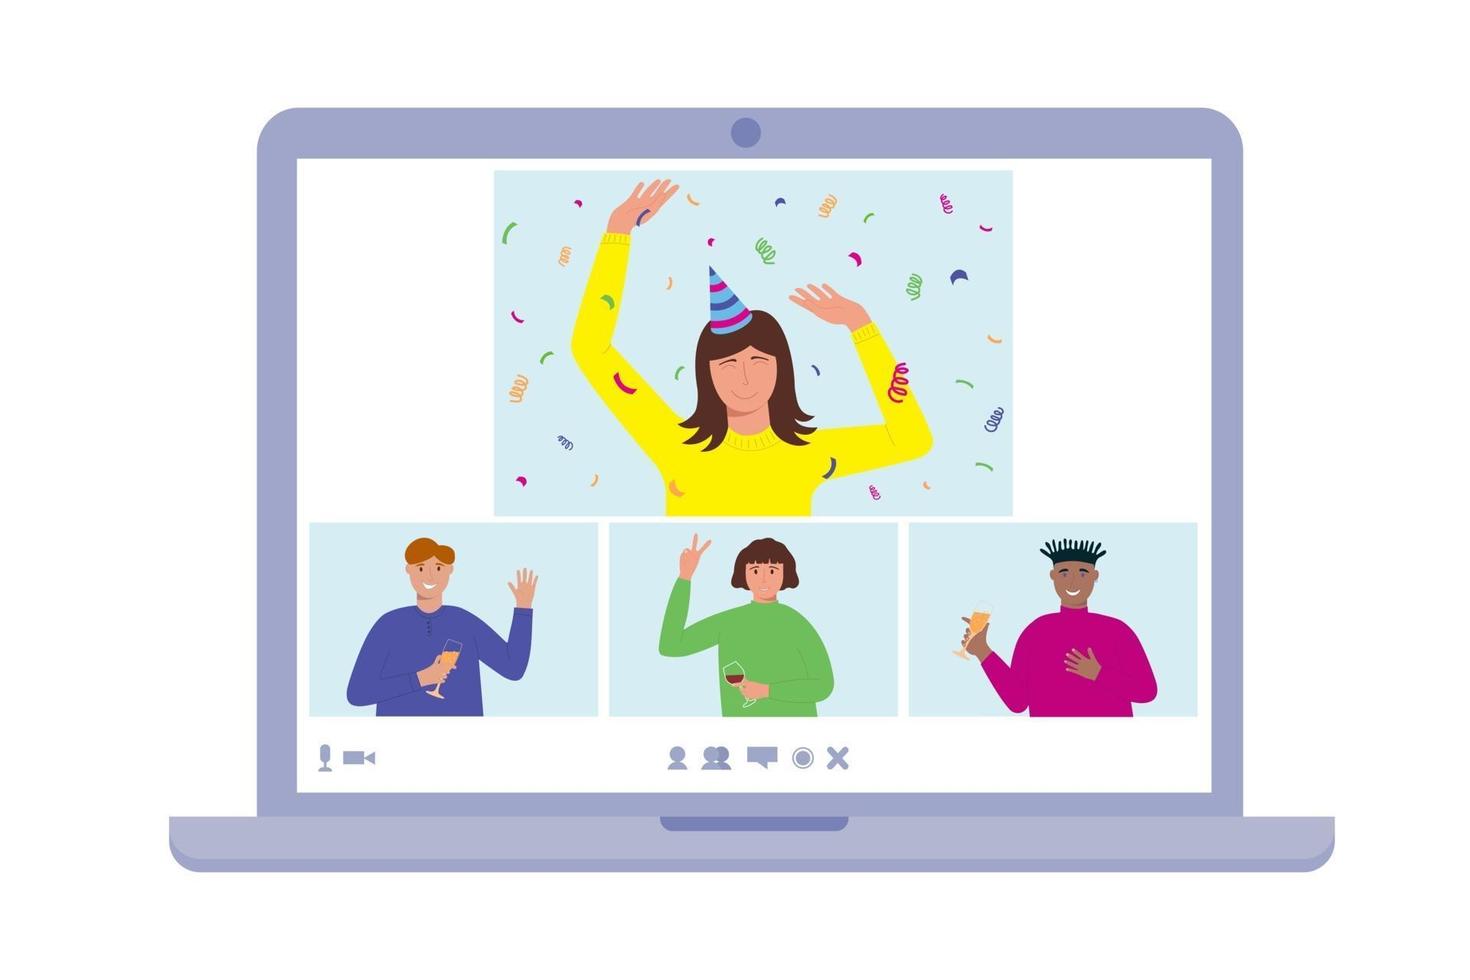 Online birthday home party concept. People on laptop screen celebrating,  communicating, dancing, drinking. Friends meeting  through video app vector